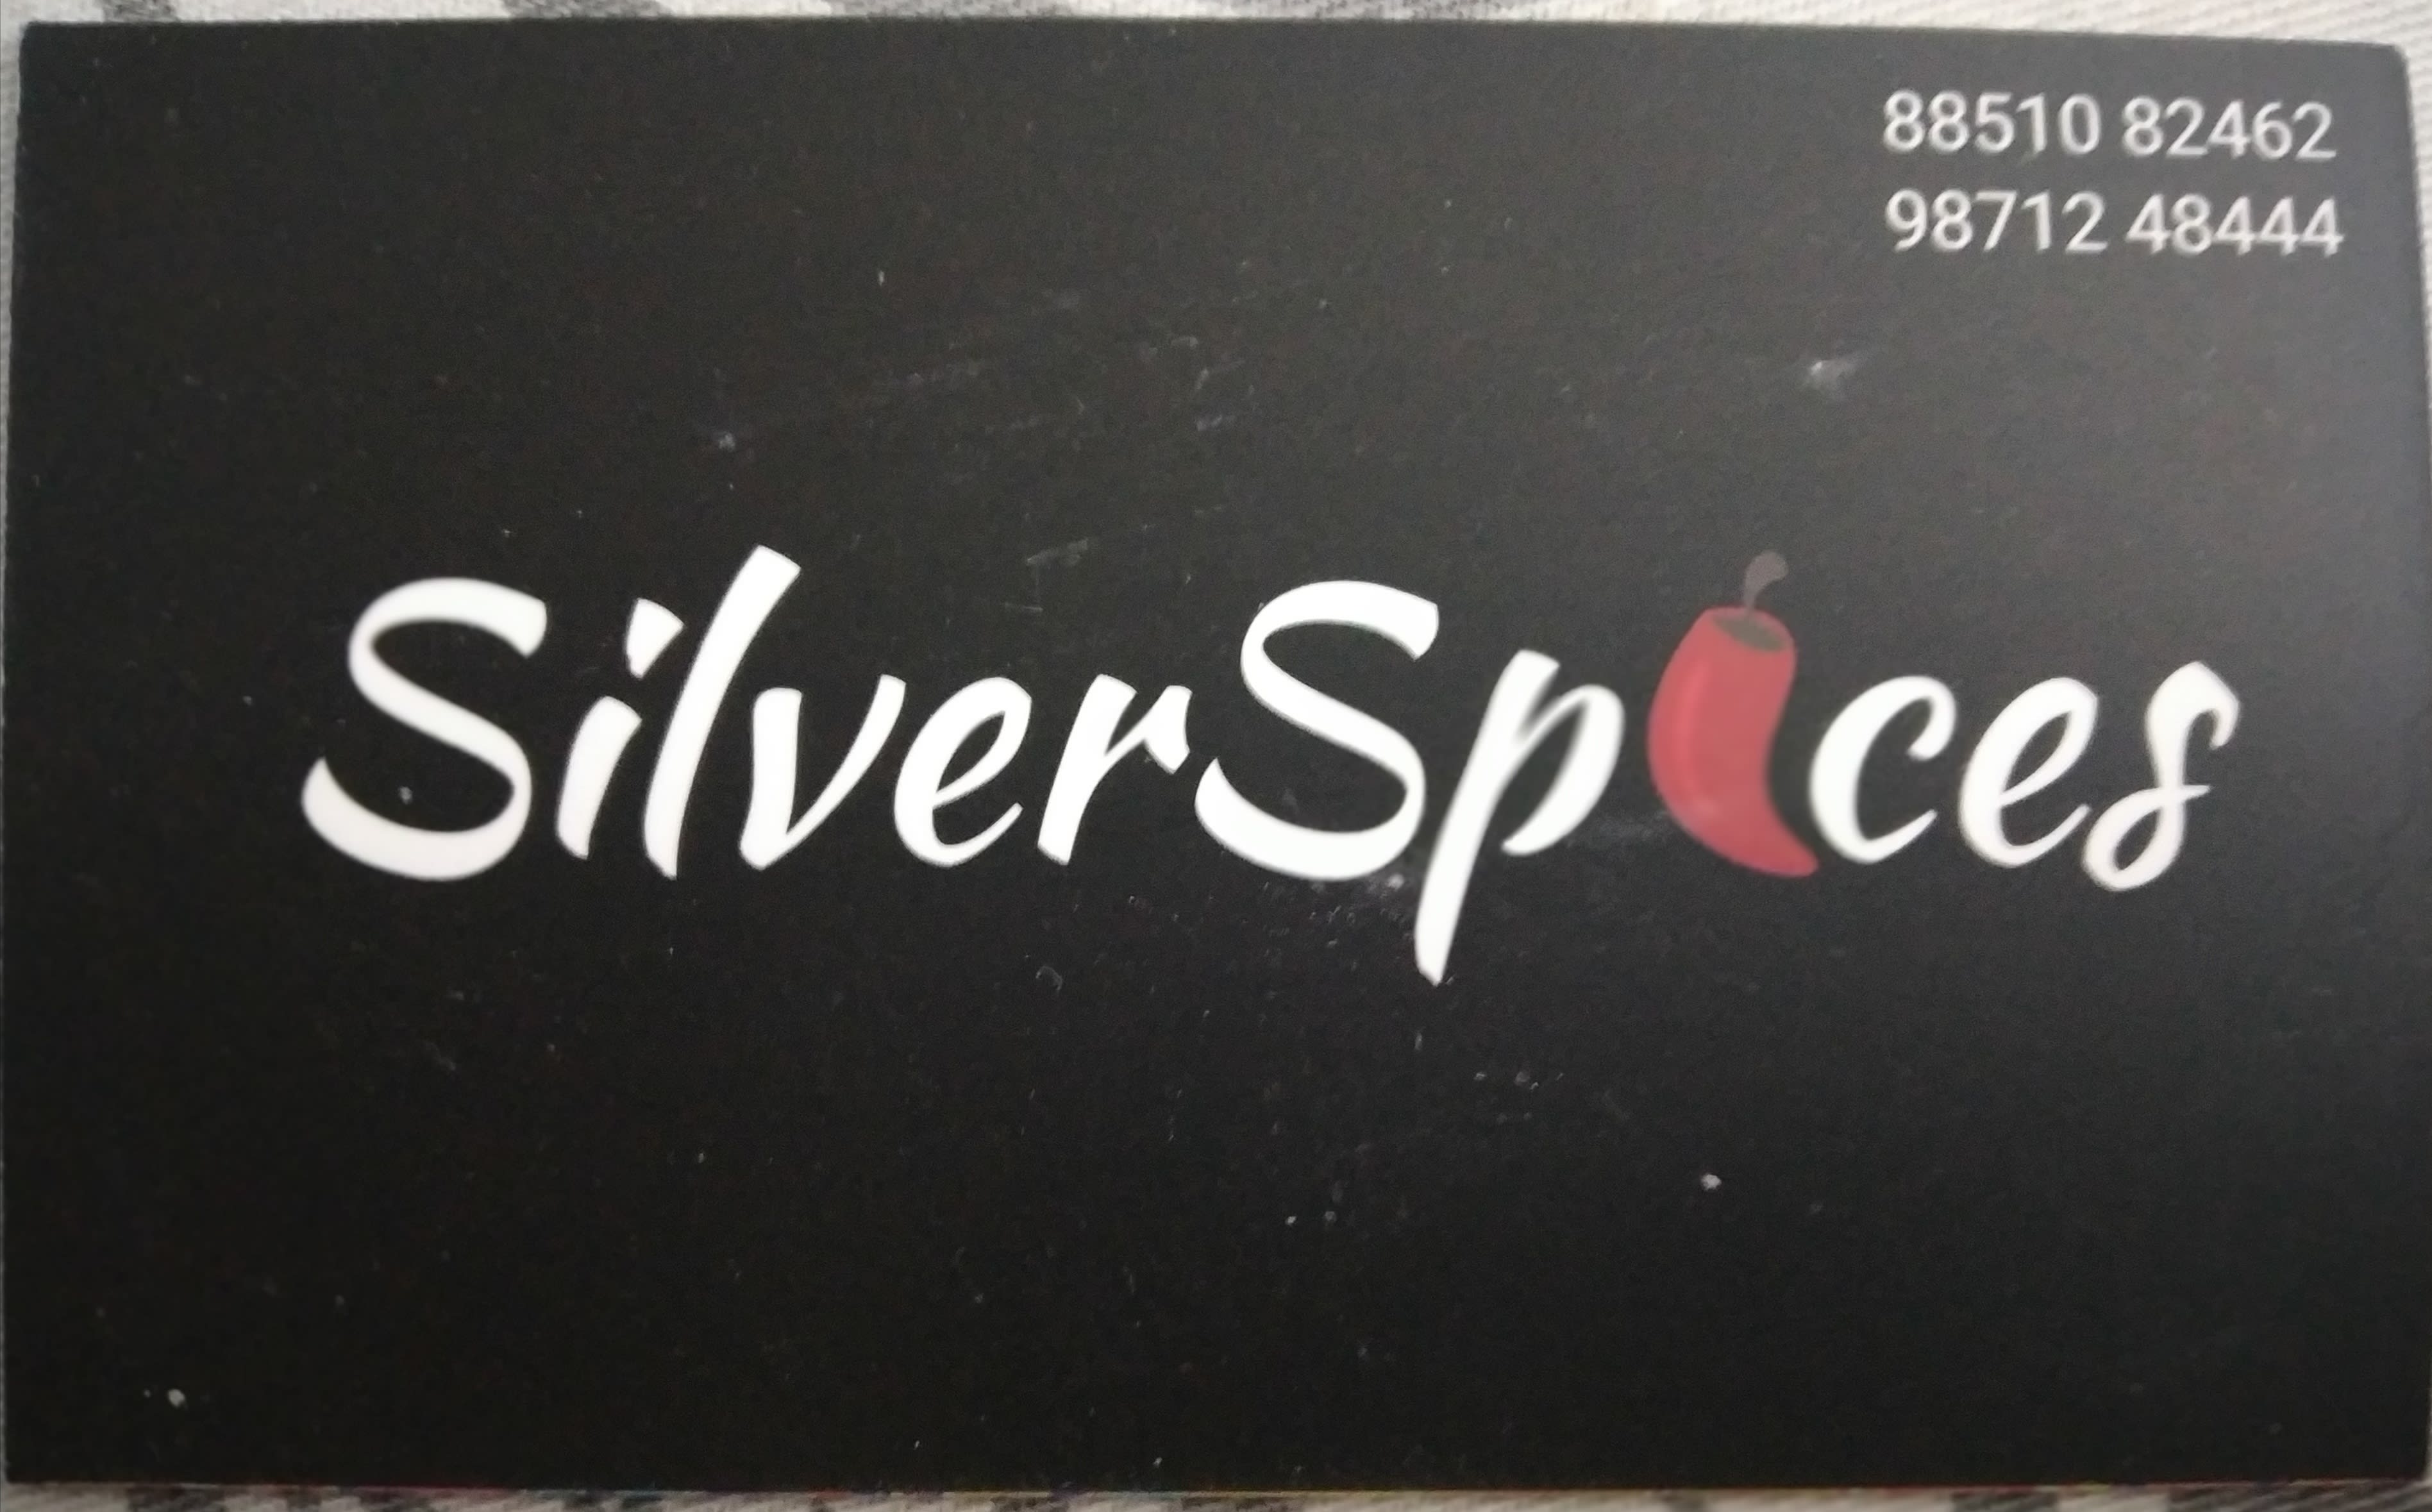 Silver Spices